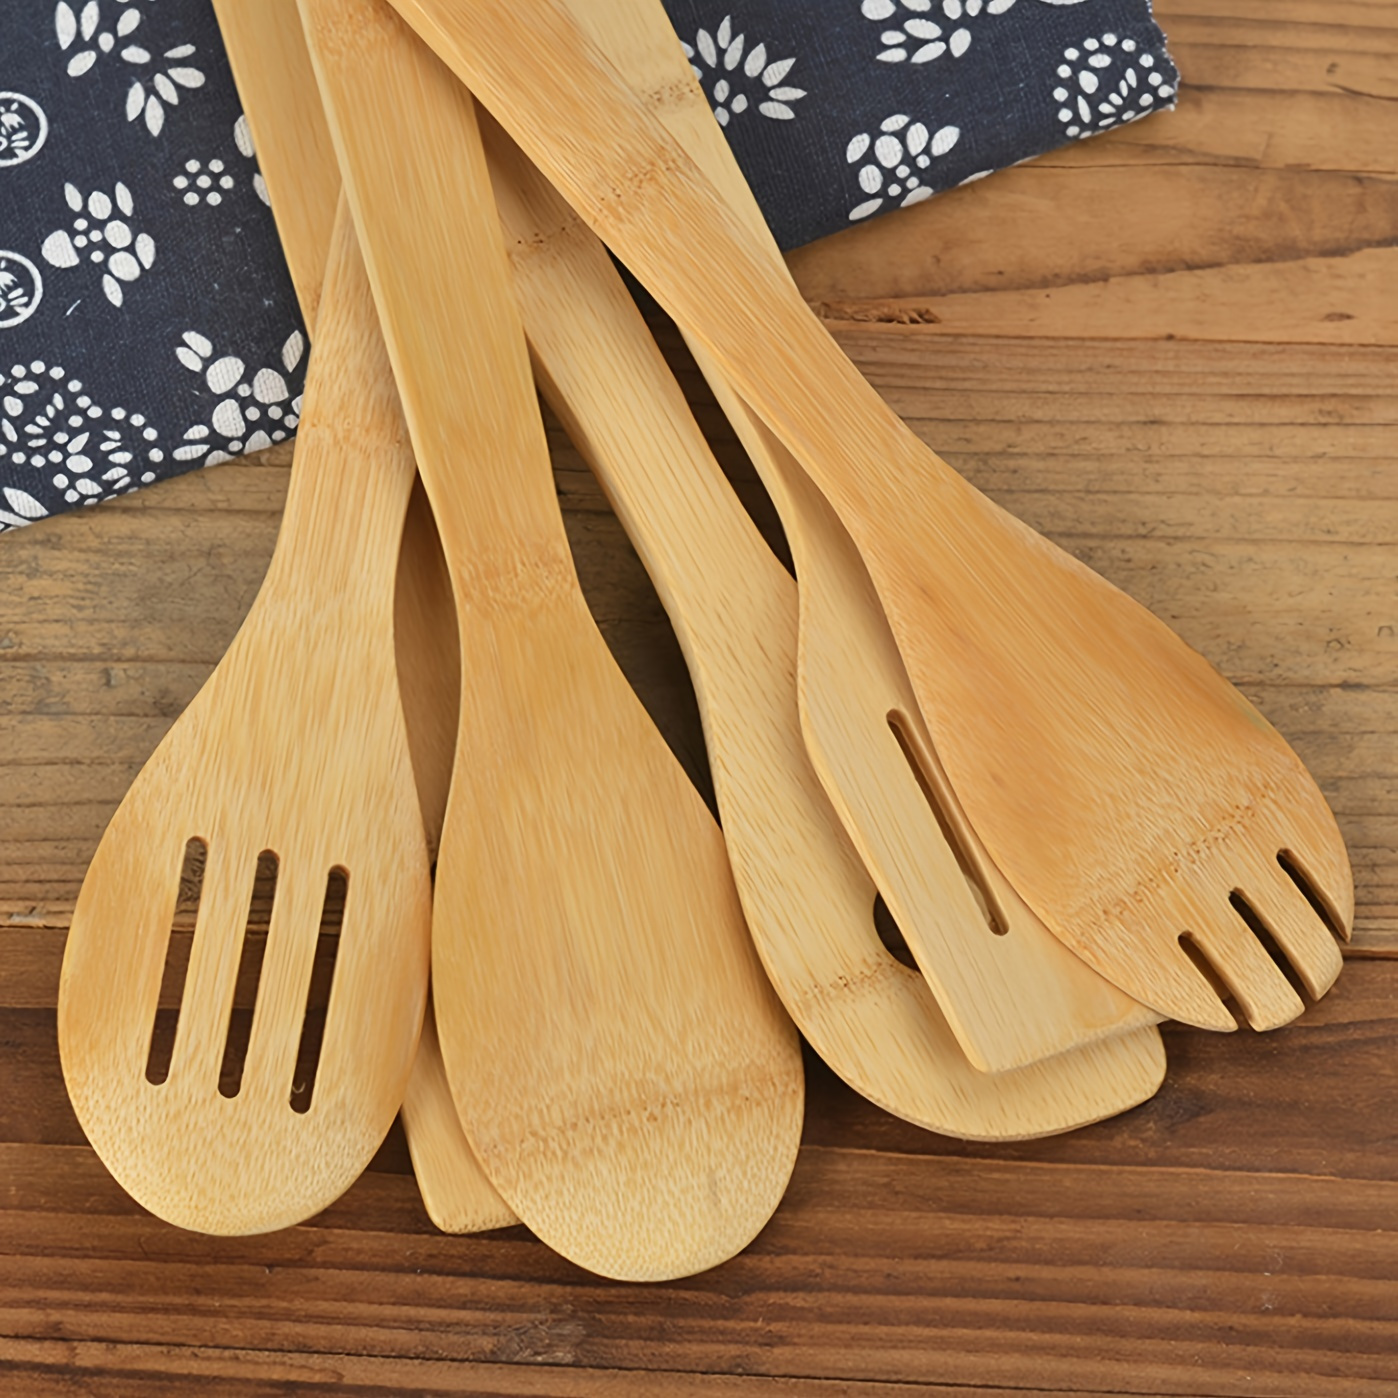 

6pcs, Bamboo Kitchen Utensil Set, Long Wooden Spoons And Spatulas, Nonstick Cookware Safe, Natural Wood Cooking Tools, Essential Home And Apartment Kitchen Accessories